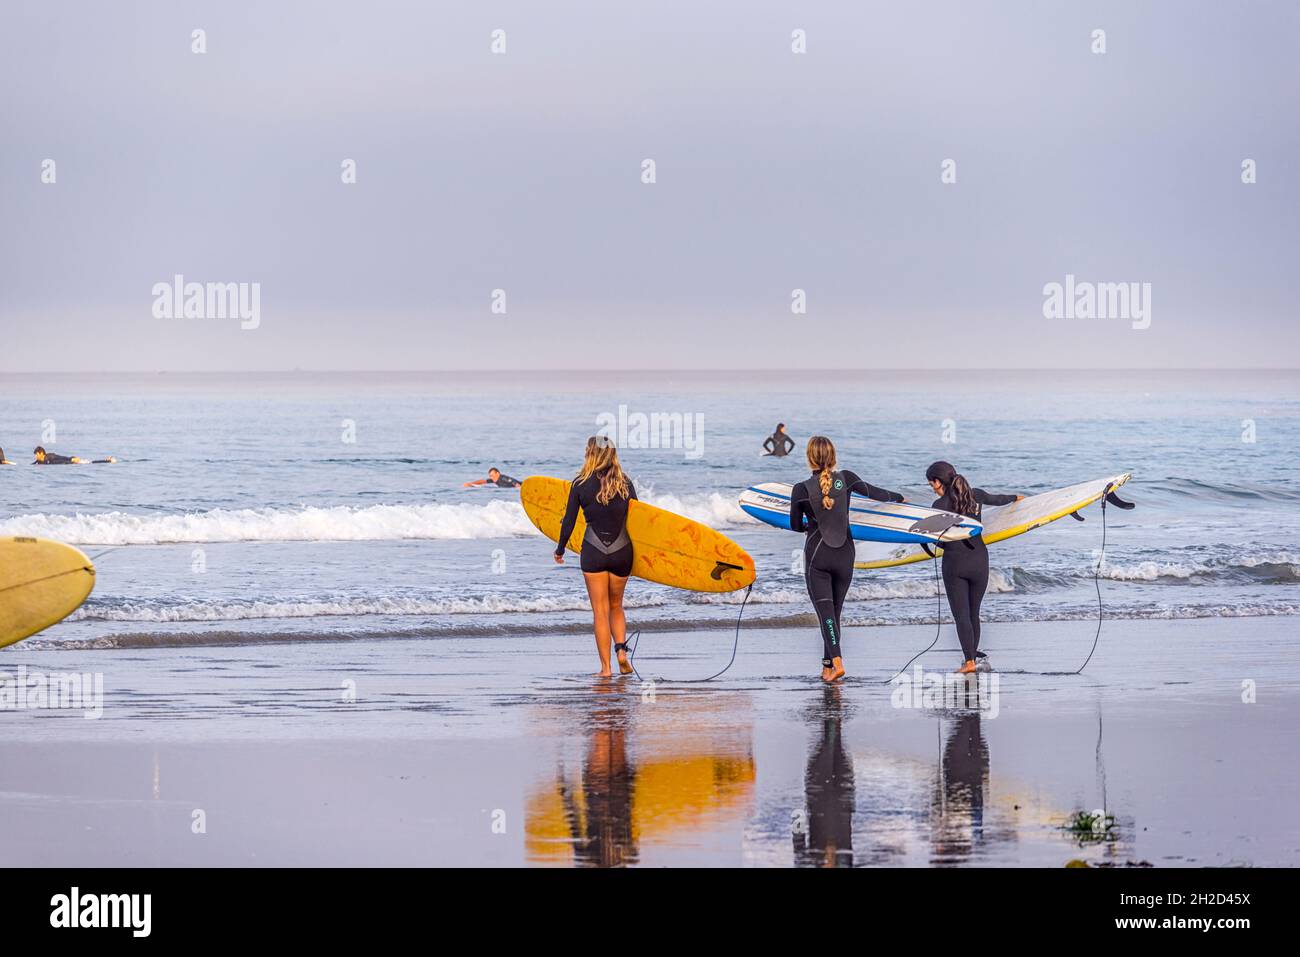 Surfers at Tourmaline Surfing Park Beach on an October morning. San Diego, CA, USA. Stock Photo